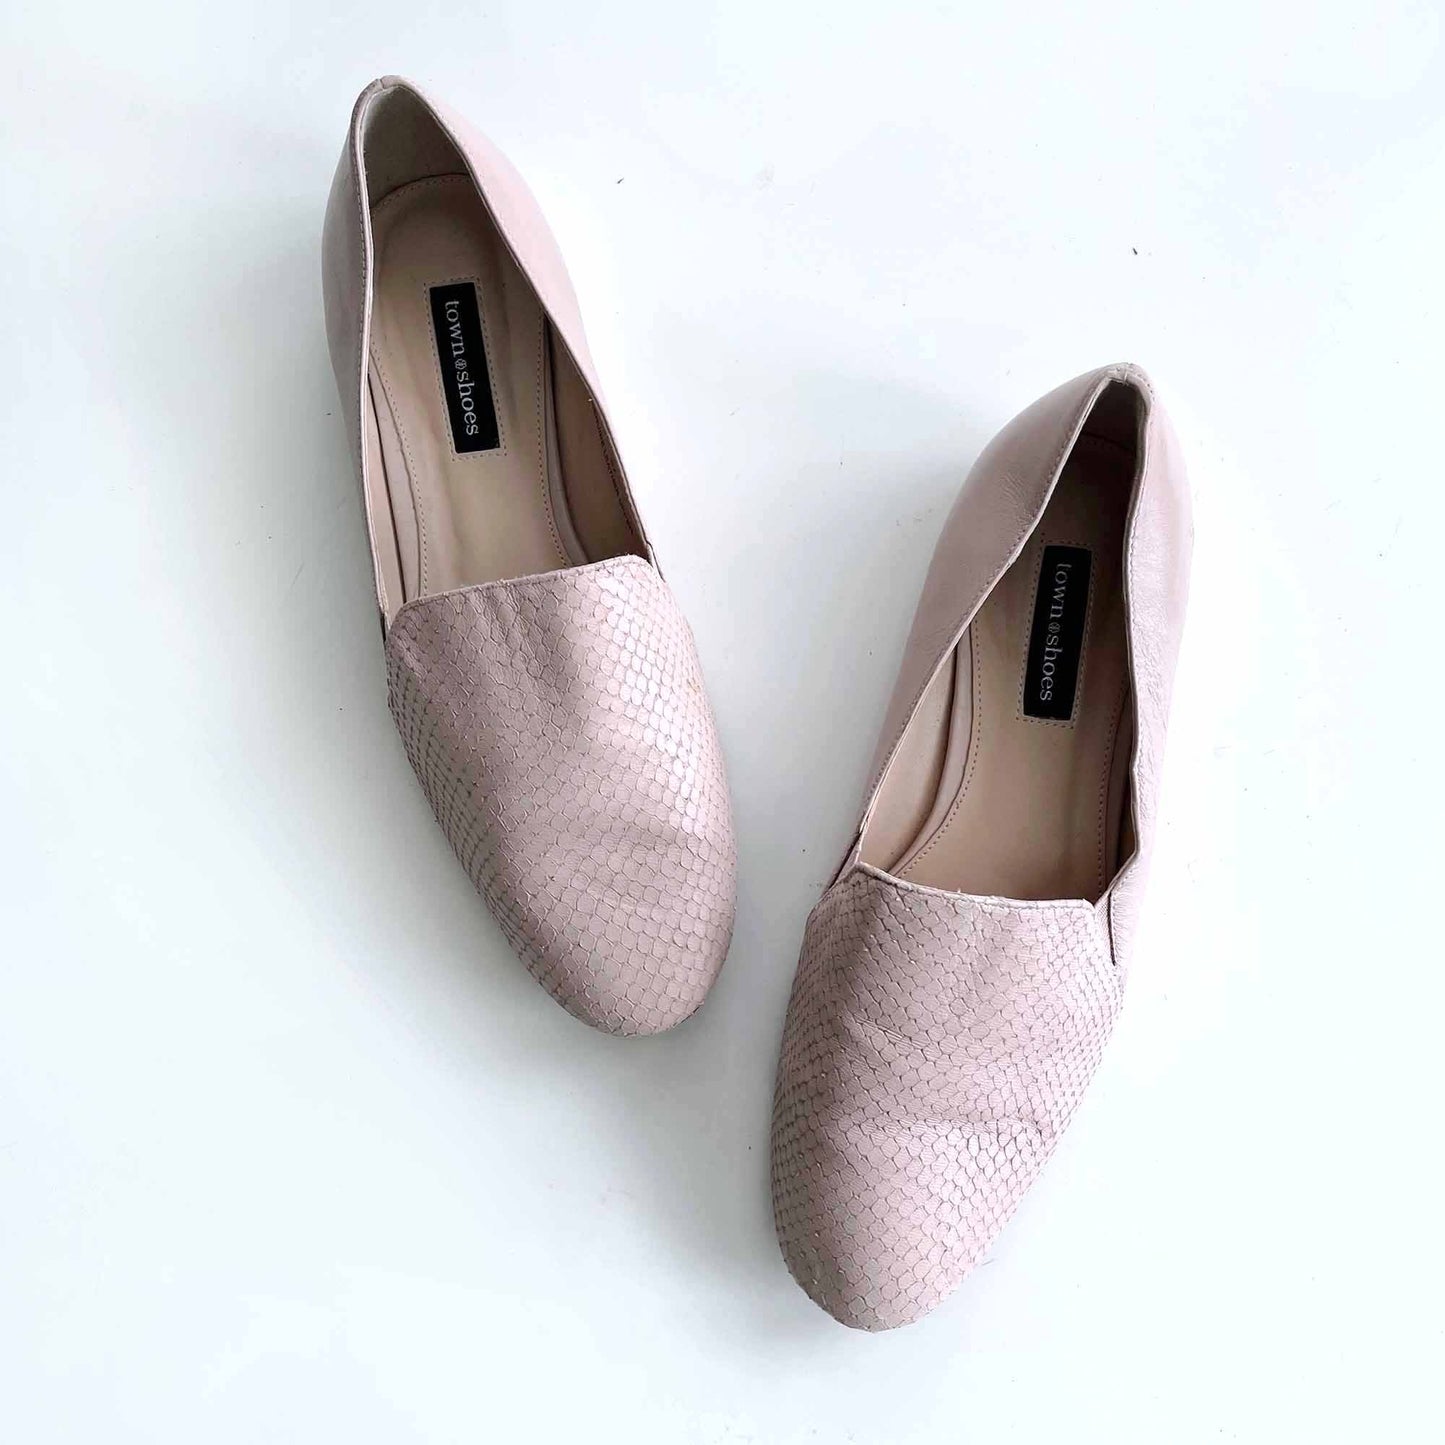 town shoes pink snakeskin leather loafers - size 37